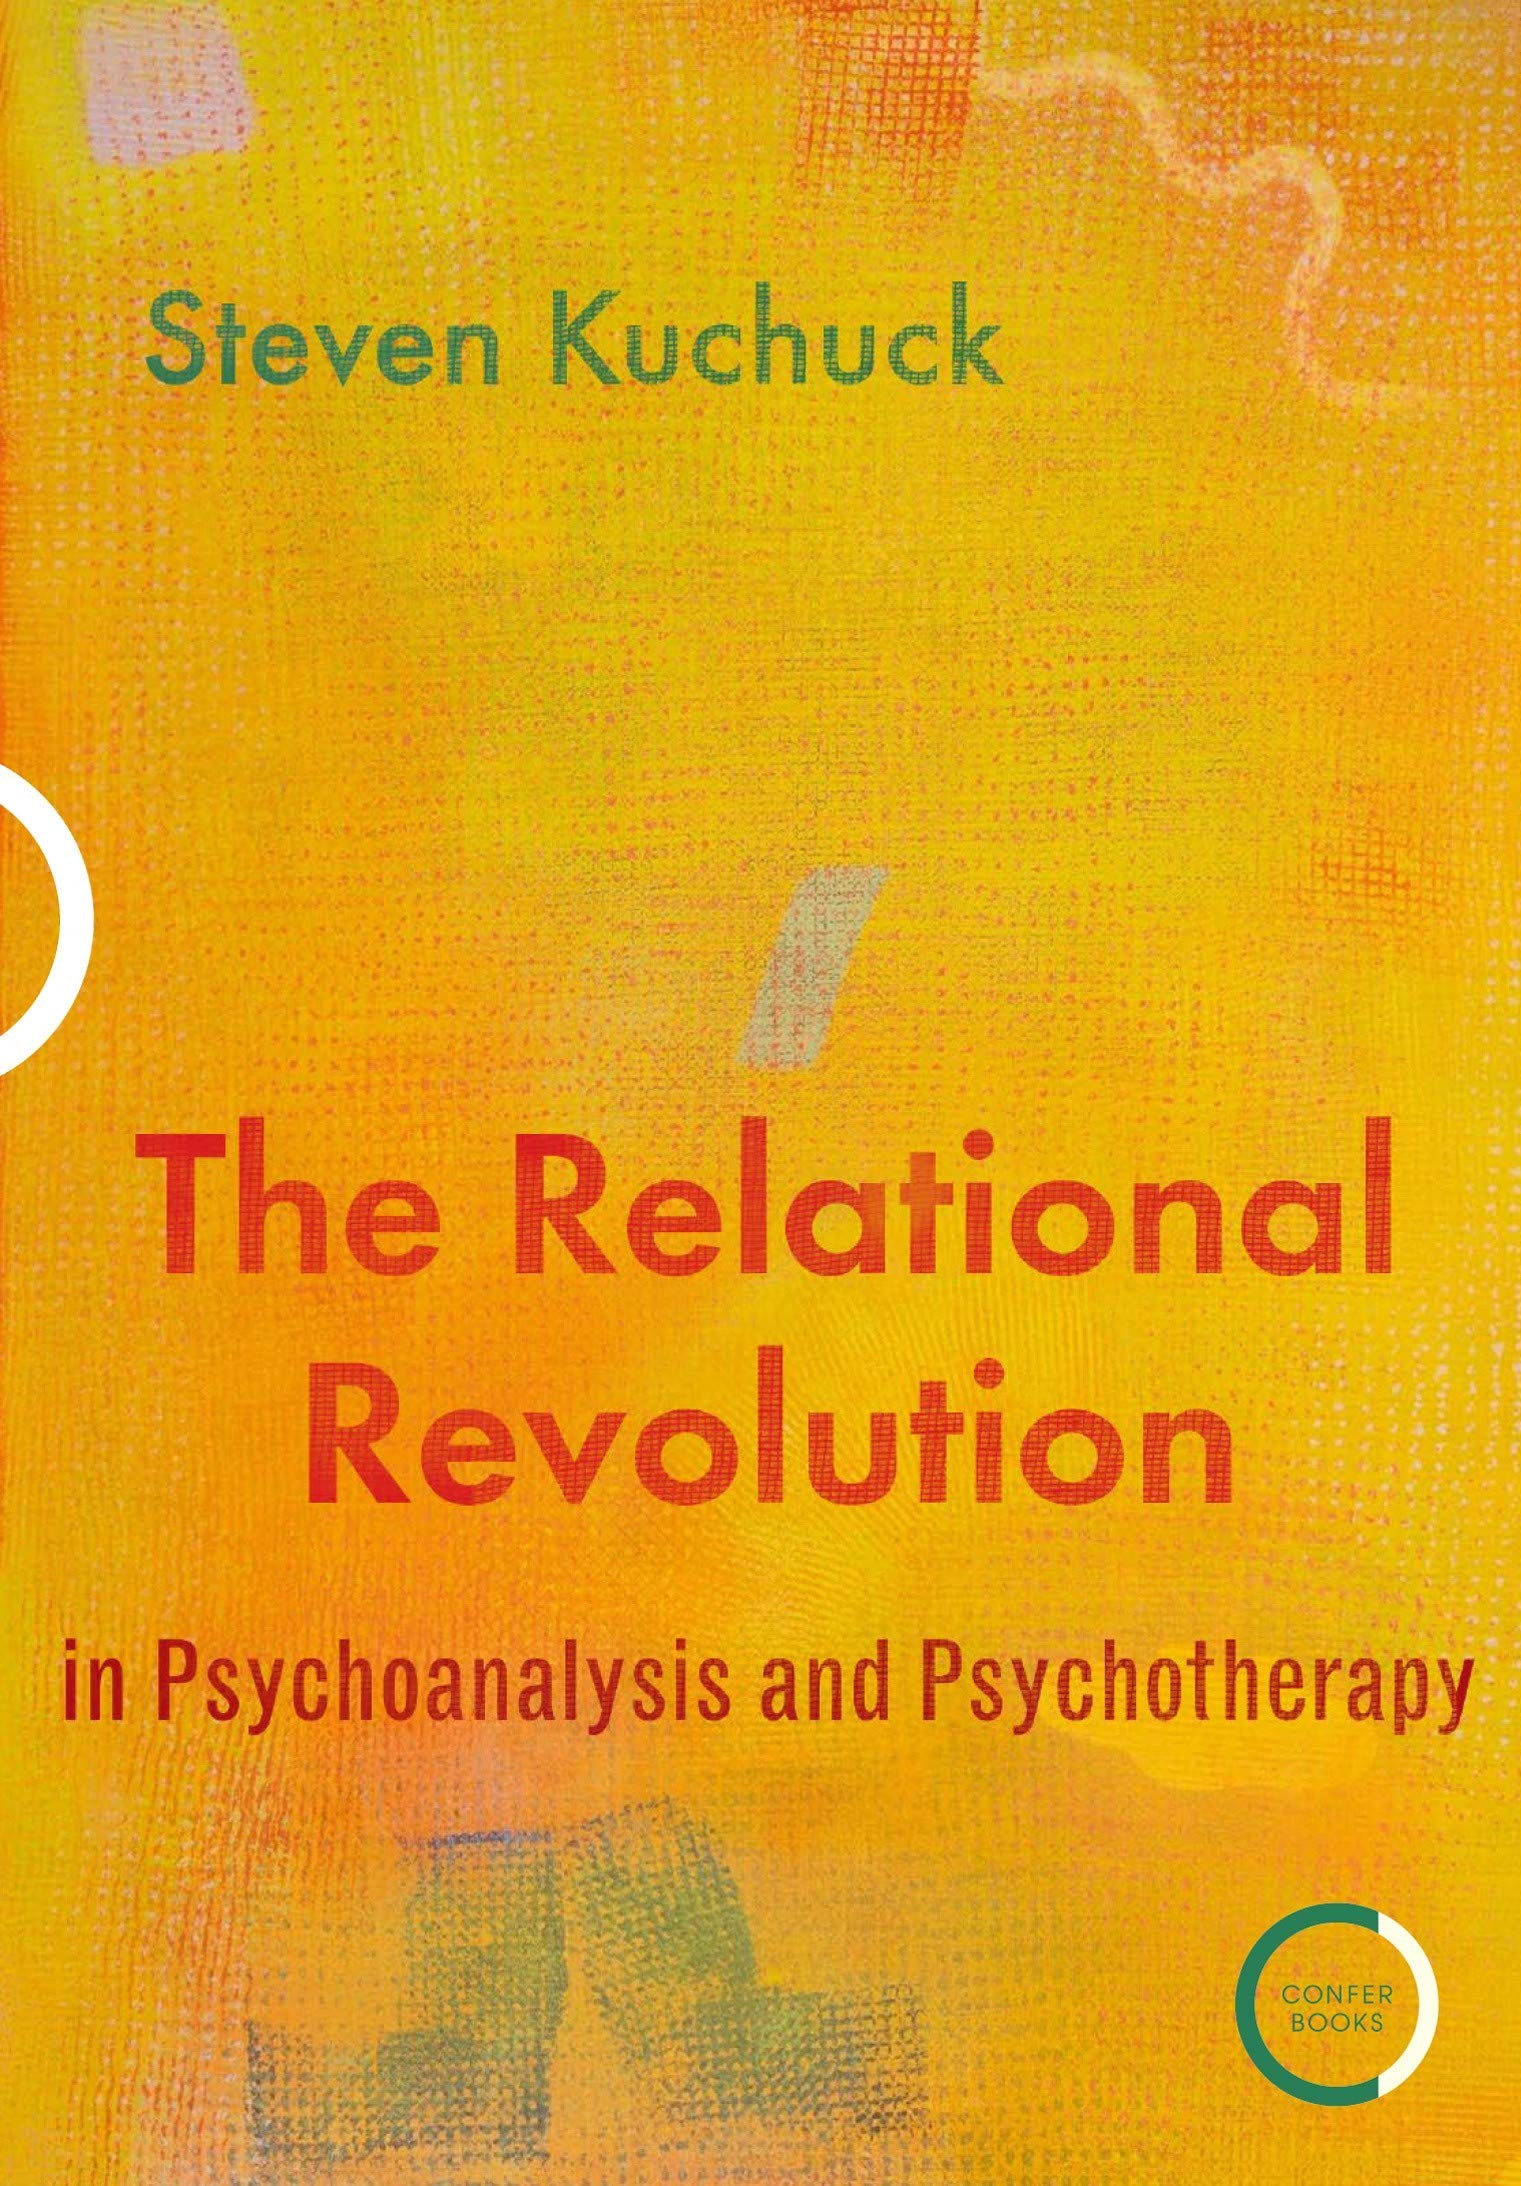 The Relational Revolution in Psychoanalysis and Psychotherapy